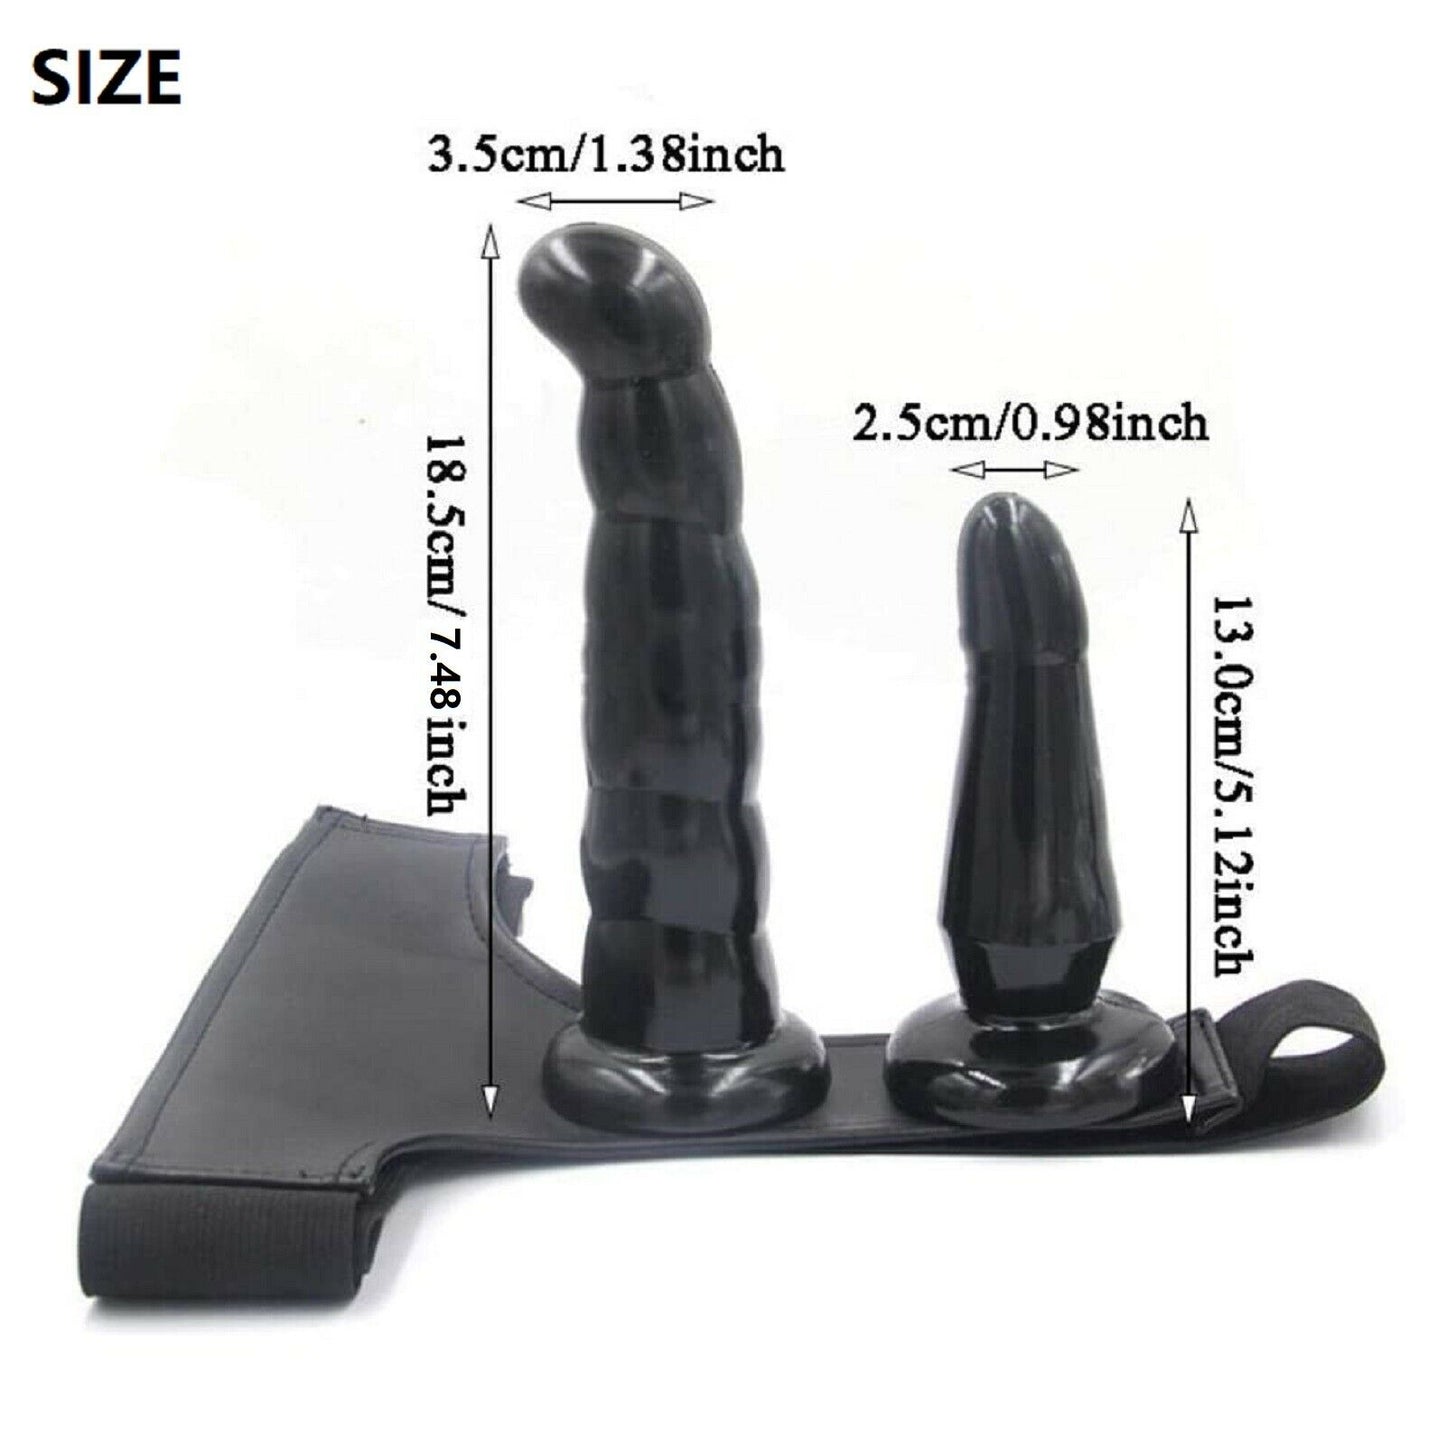 Wearable Double Dildo Strap On Harness Lesbian Couples Dong Gay Adult Sex Toy